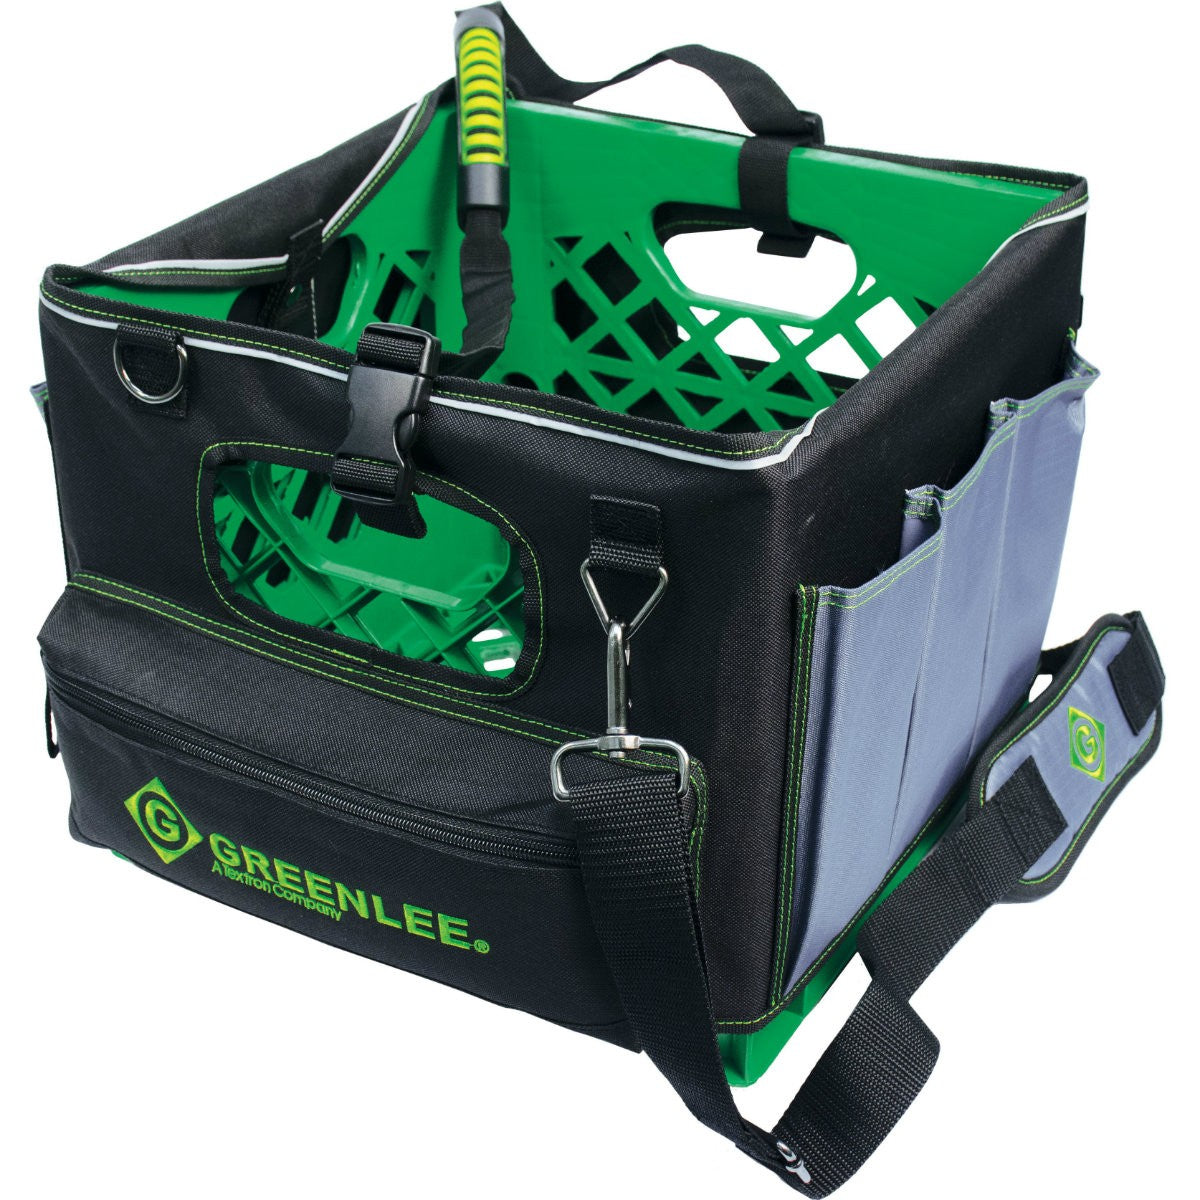 Greenlee 0158-28 Crate Cover Tool Organizer